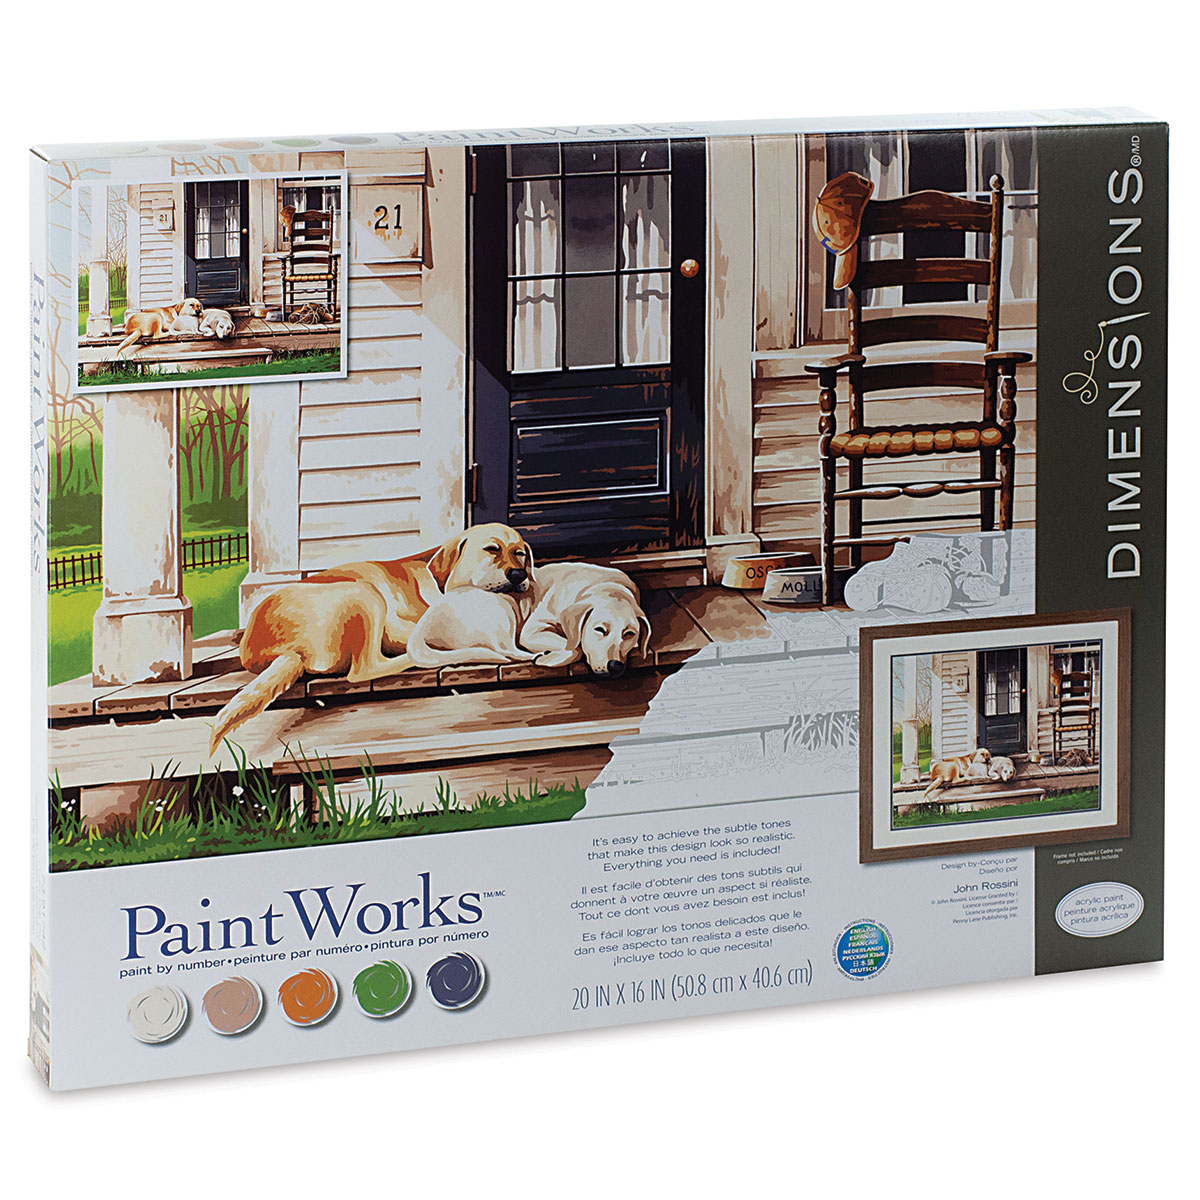 Paint Works Paint By Number Kit 20 x 16 - Lazy Dog Day - 9954344